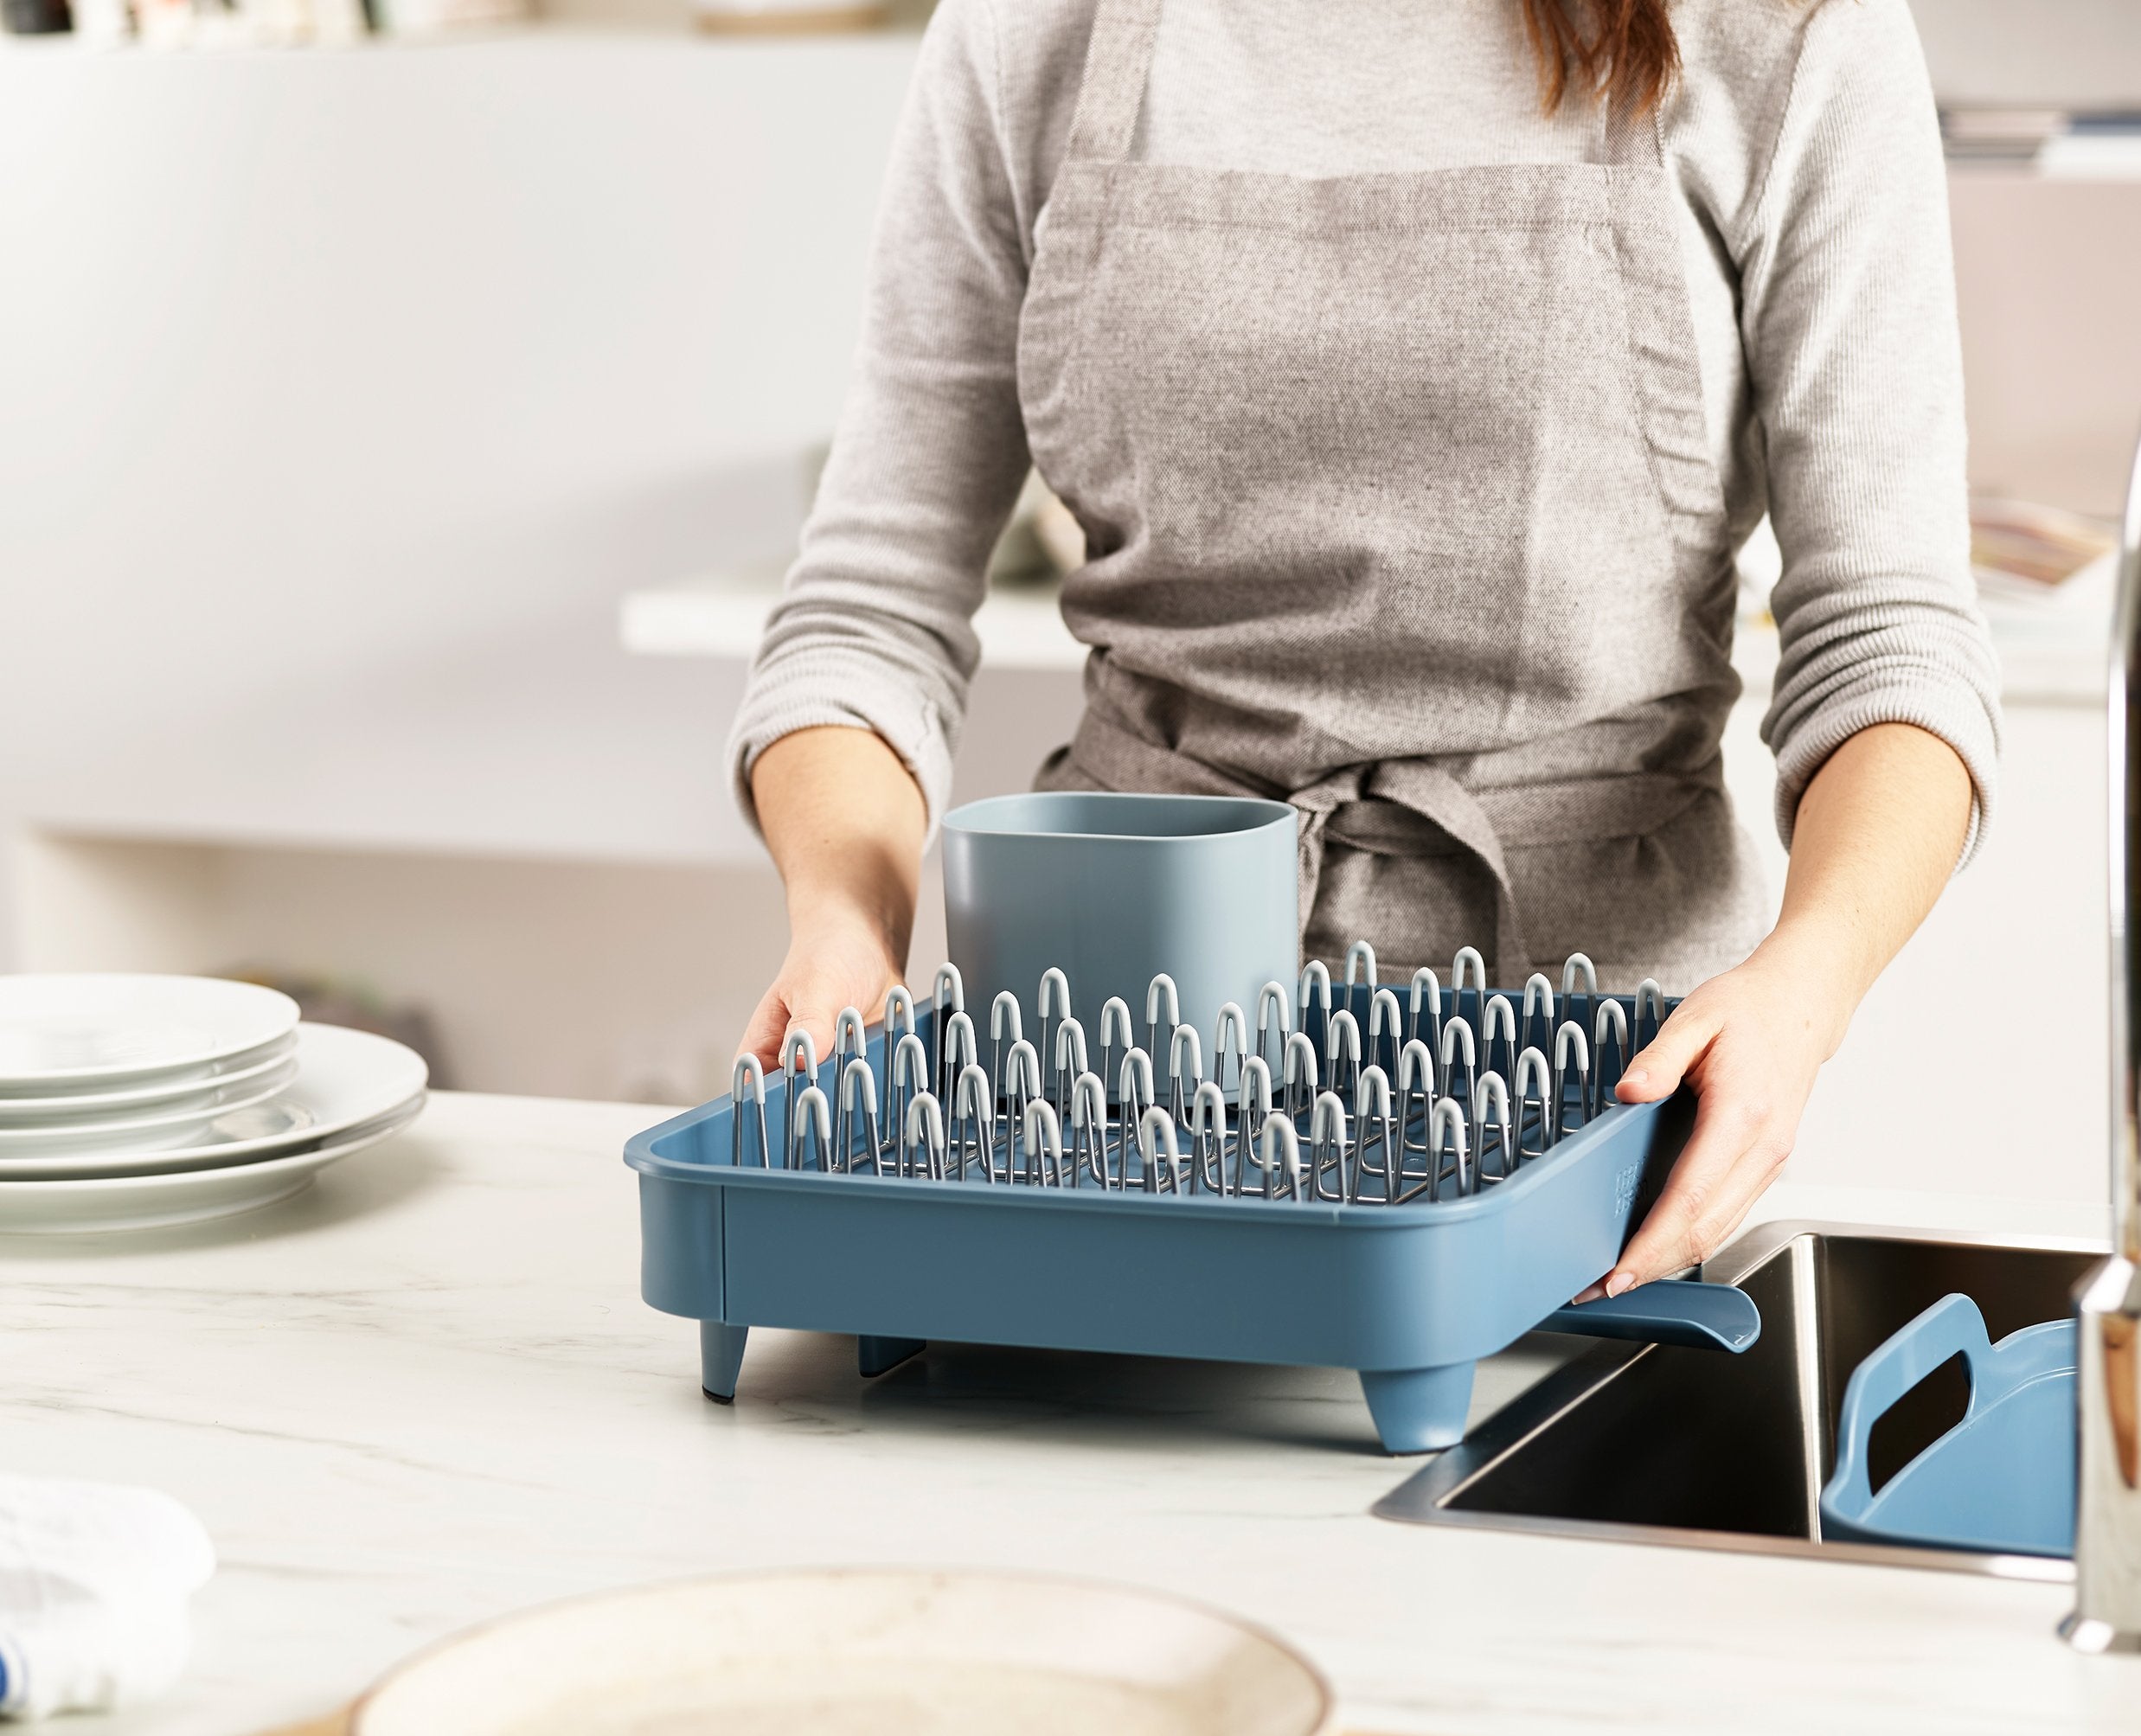 BEON.COM.AU  Our iconic Extend™ Dish Drainer now comes in our best selling Editions colours to match perfectly in your kitchen scheme.  Extends to almost twice its size to hold more items when needed Integrated plug can be set to trap water for draining later Raised ribs prevent water being trapped under gla... Joseph Joseph at BEON.COM.AU